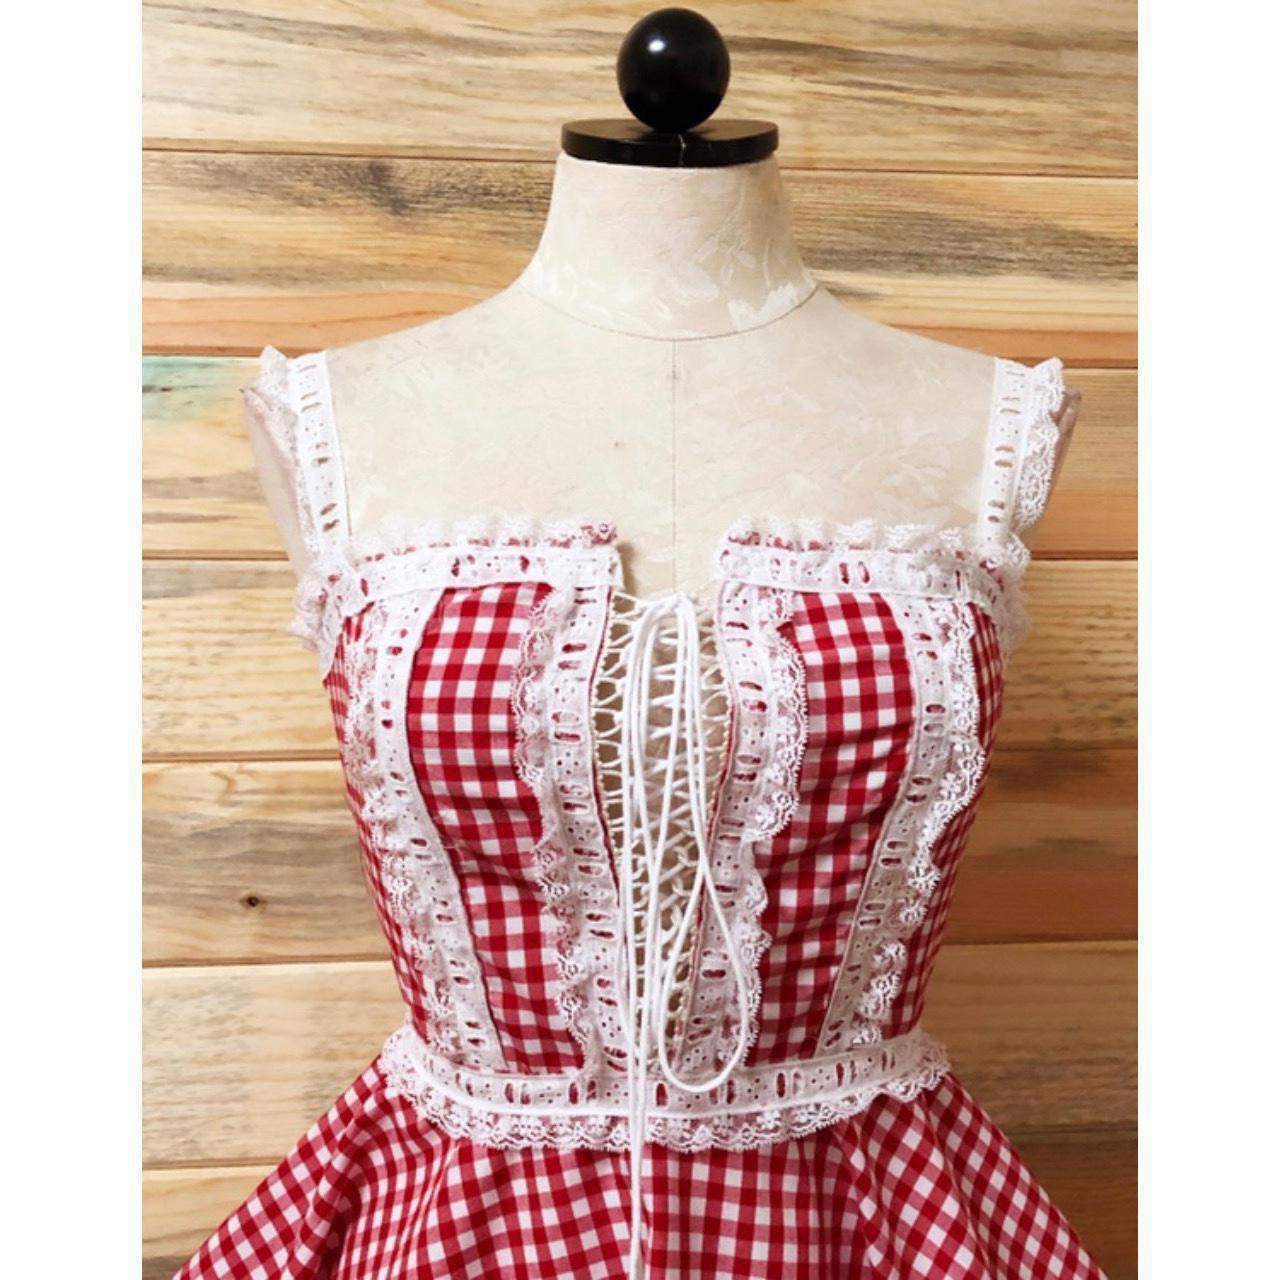 The Danni Dress in Red Gingham